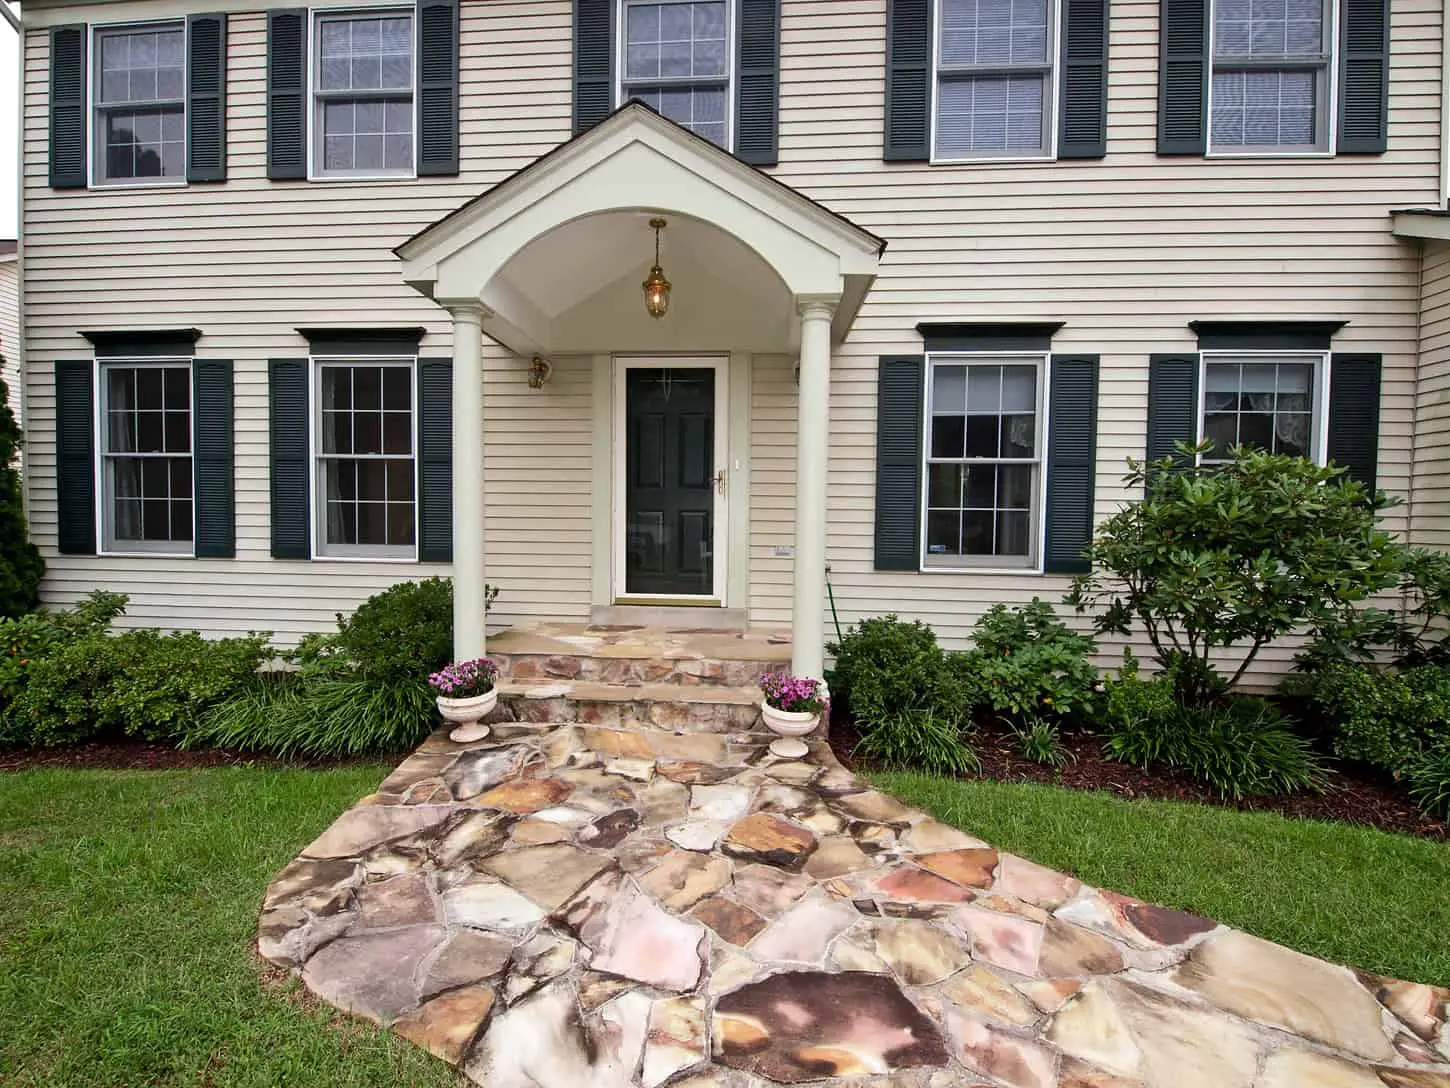 How to Install a flagstone walkway - FindHow